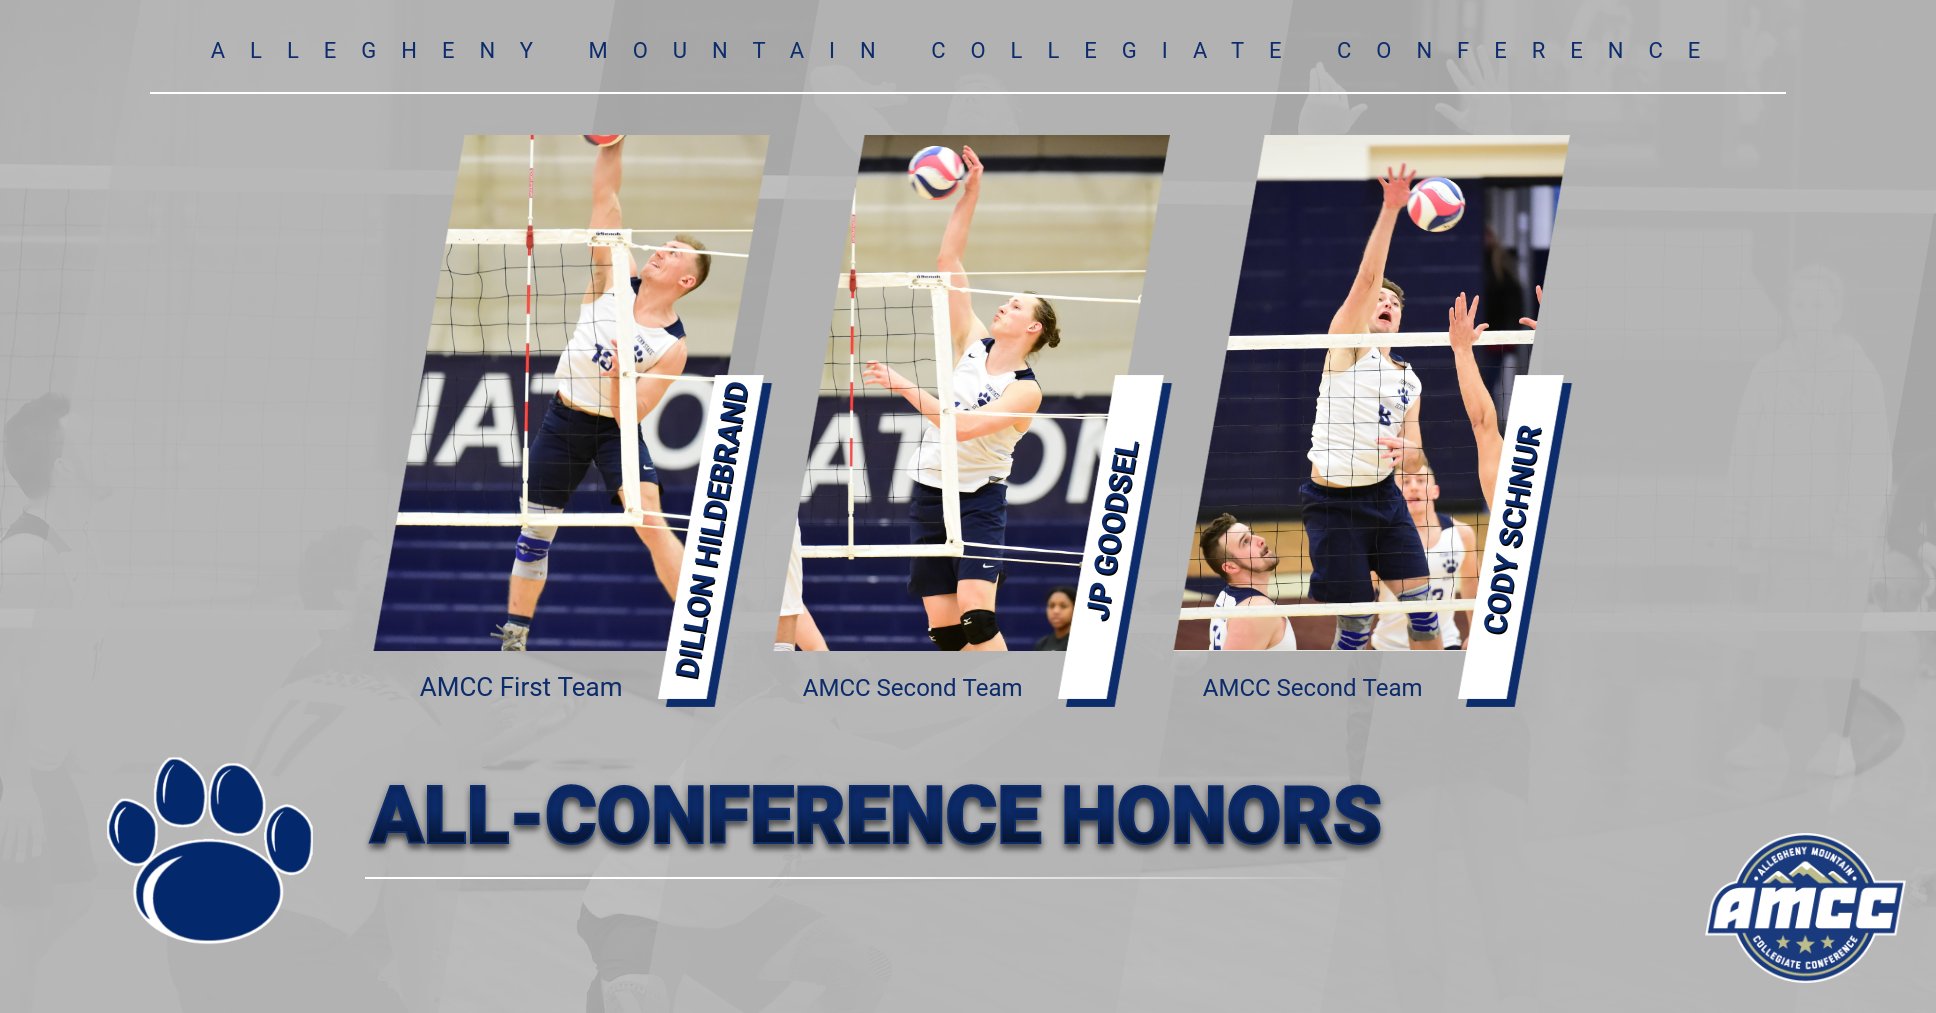 Three Named to AMCC Men's Volleyball All-Conference Team